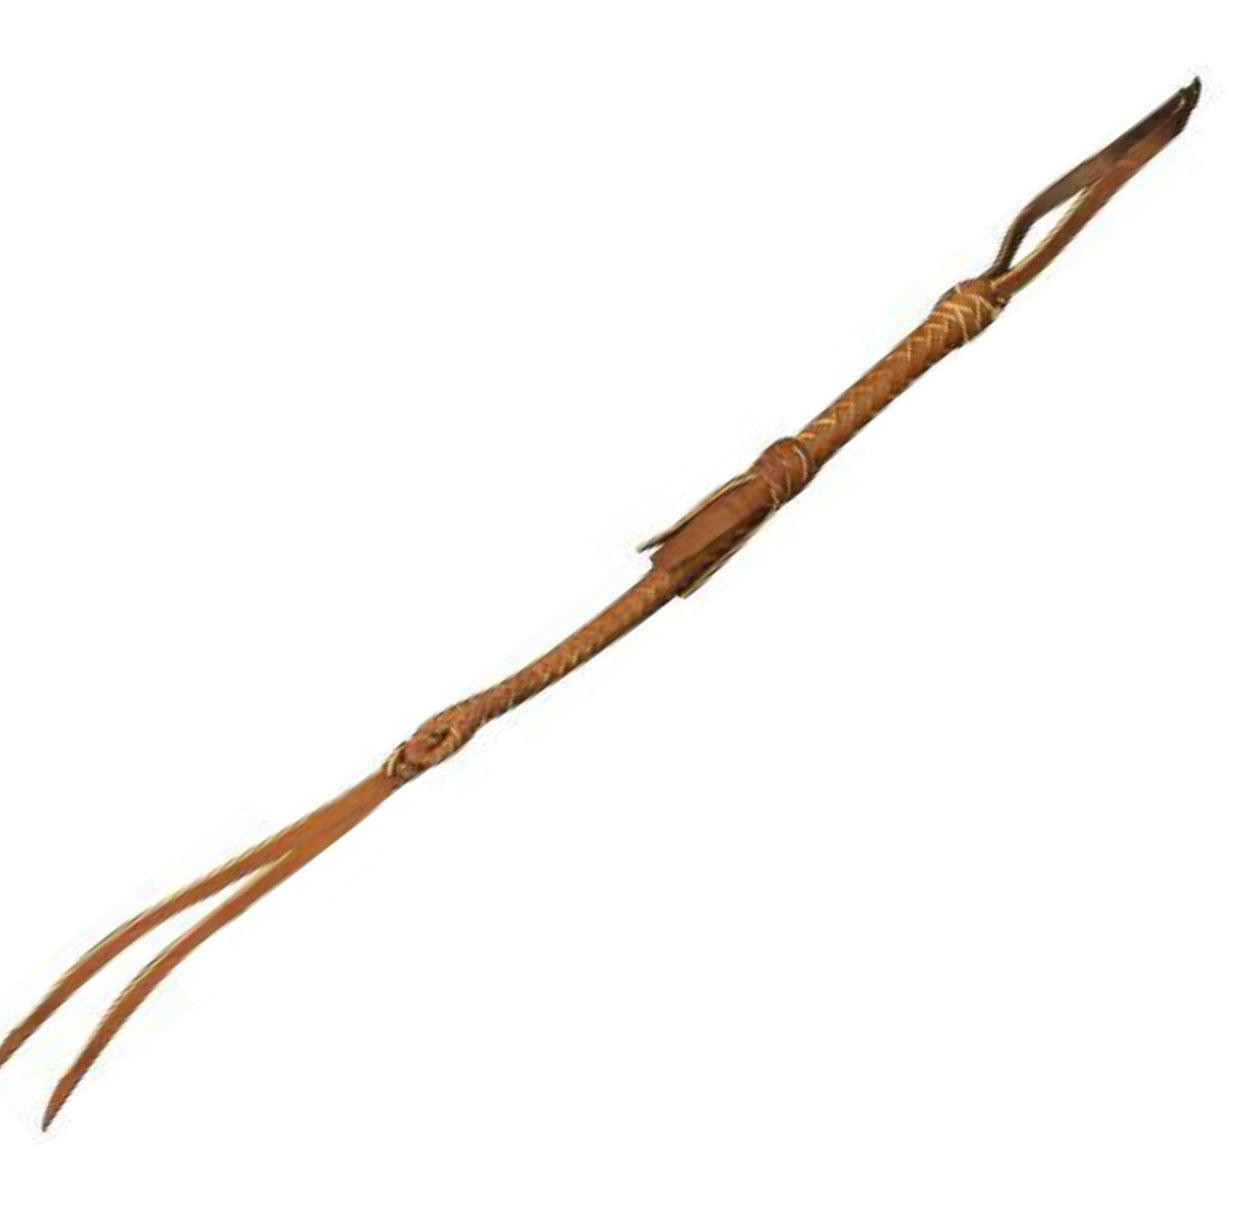 6650 - Leather Braided Quirt with Wrist Loop.